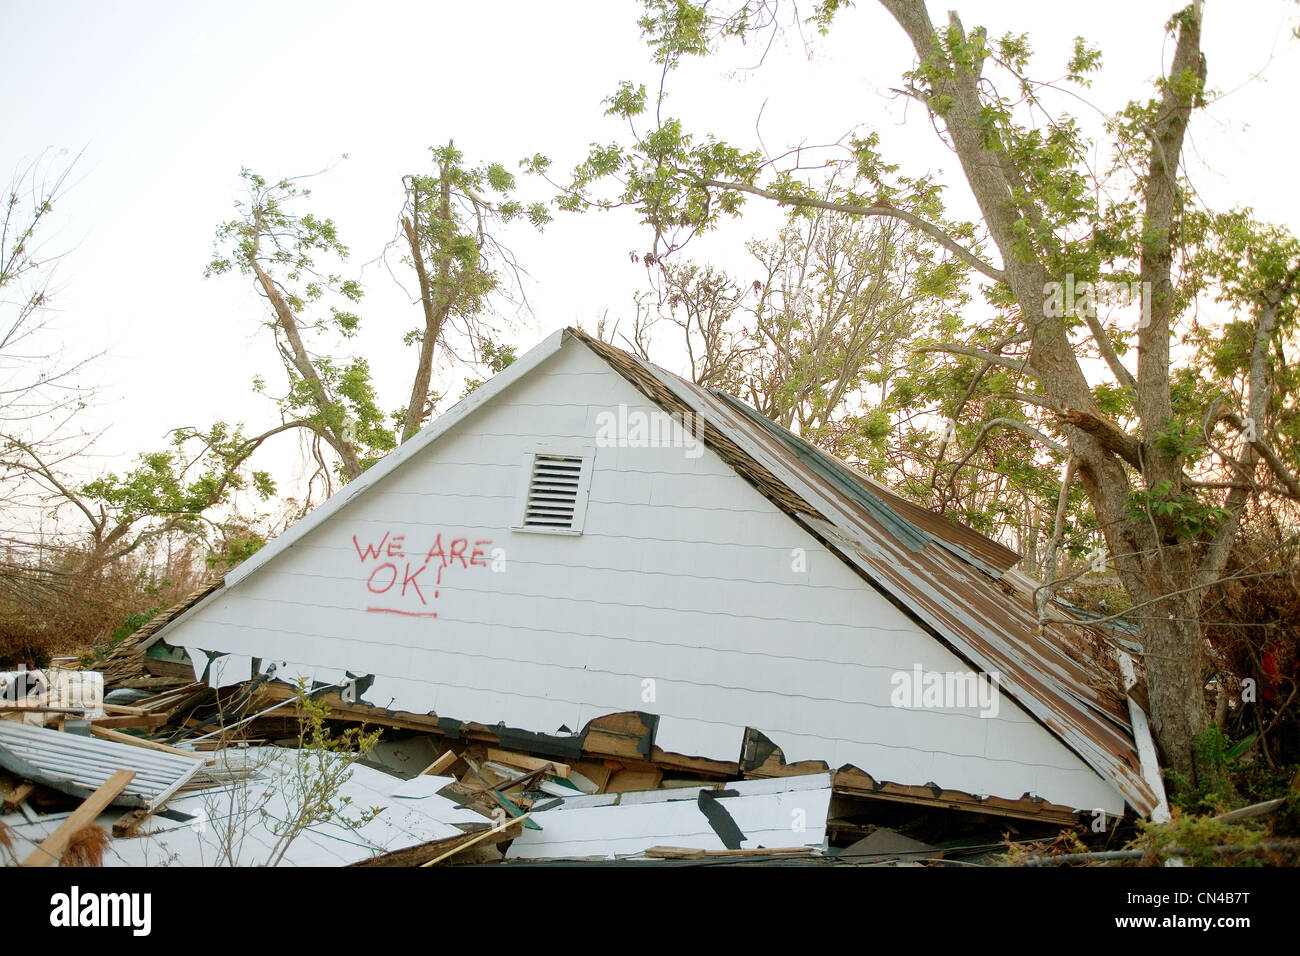 Upper level of residential house on ground amidst wreckage, aftermath of Hurraine Katrina, Biloxi, USA Stock Photo